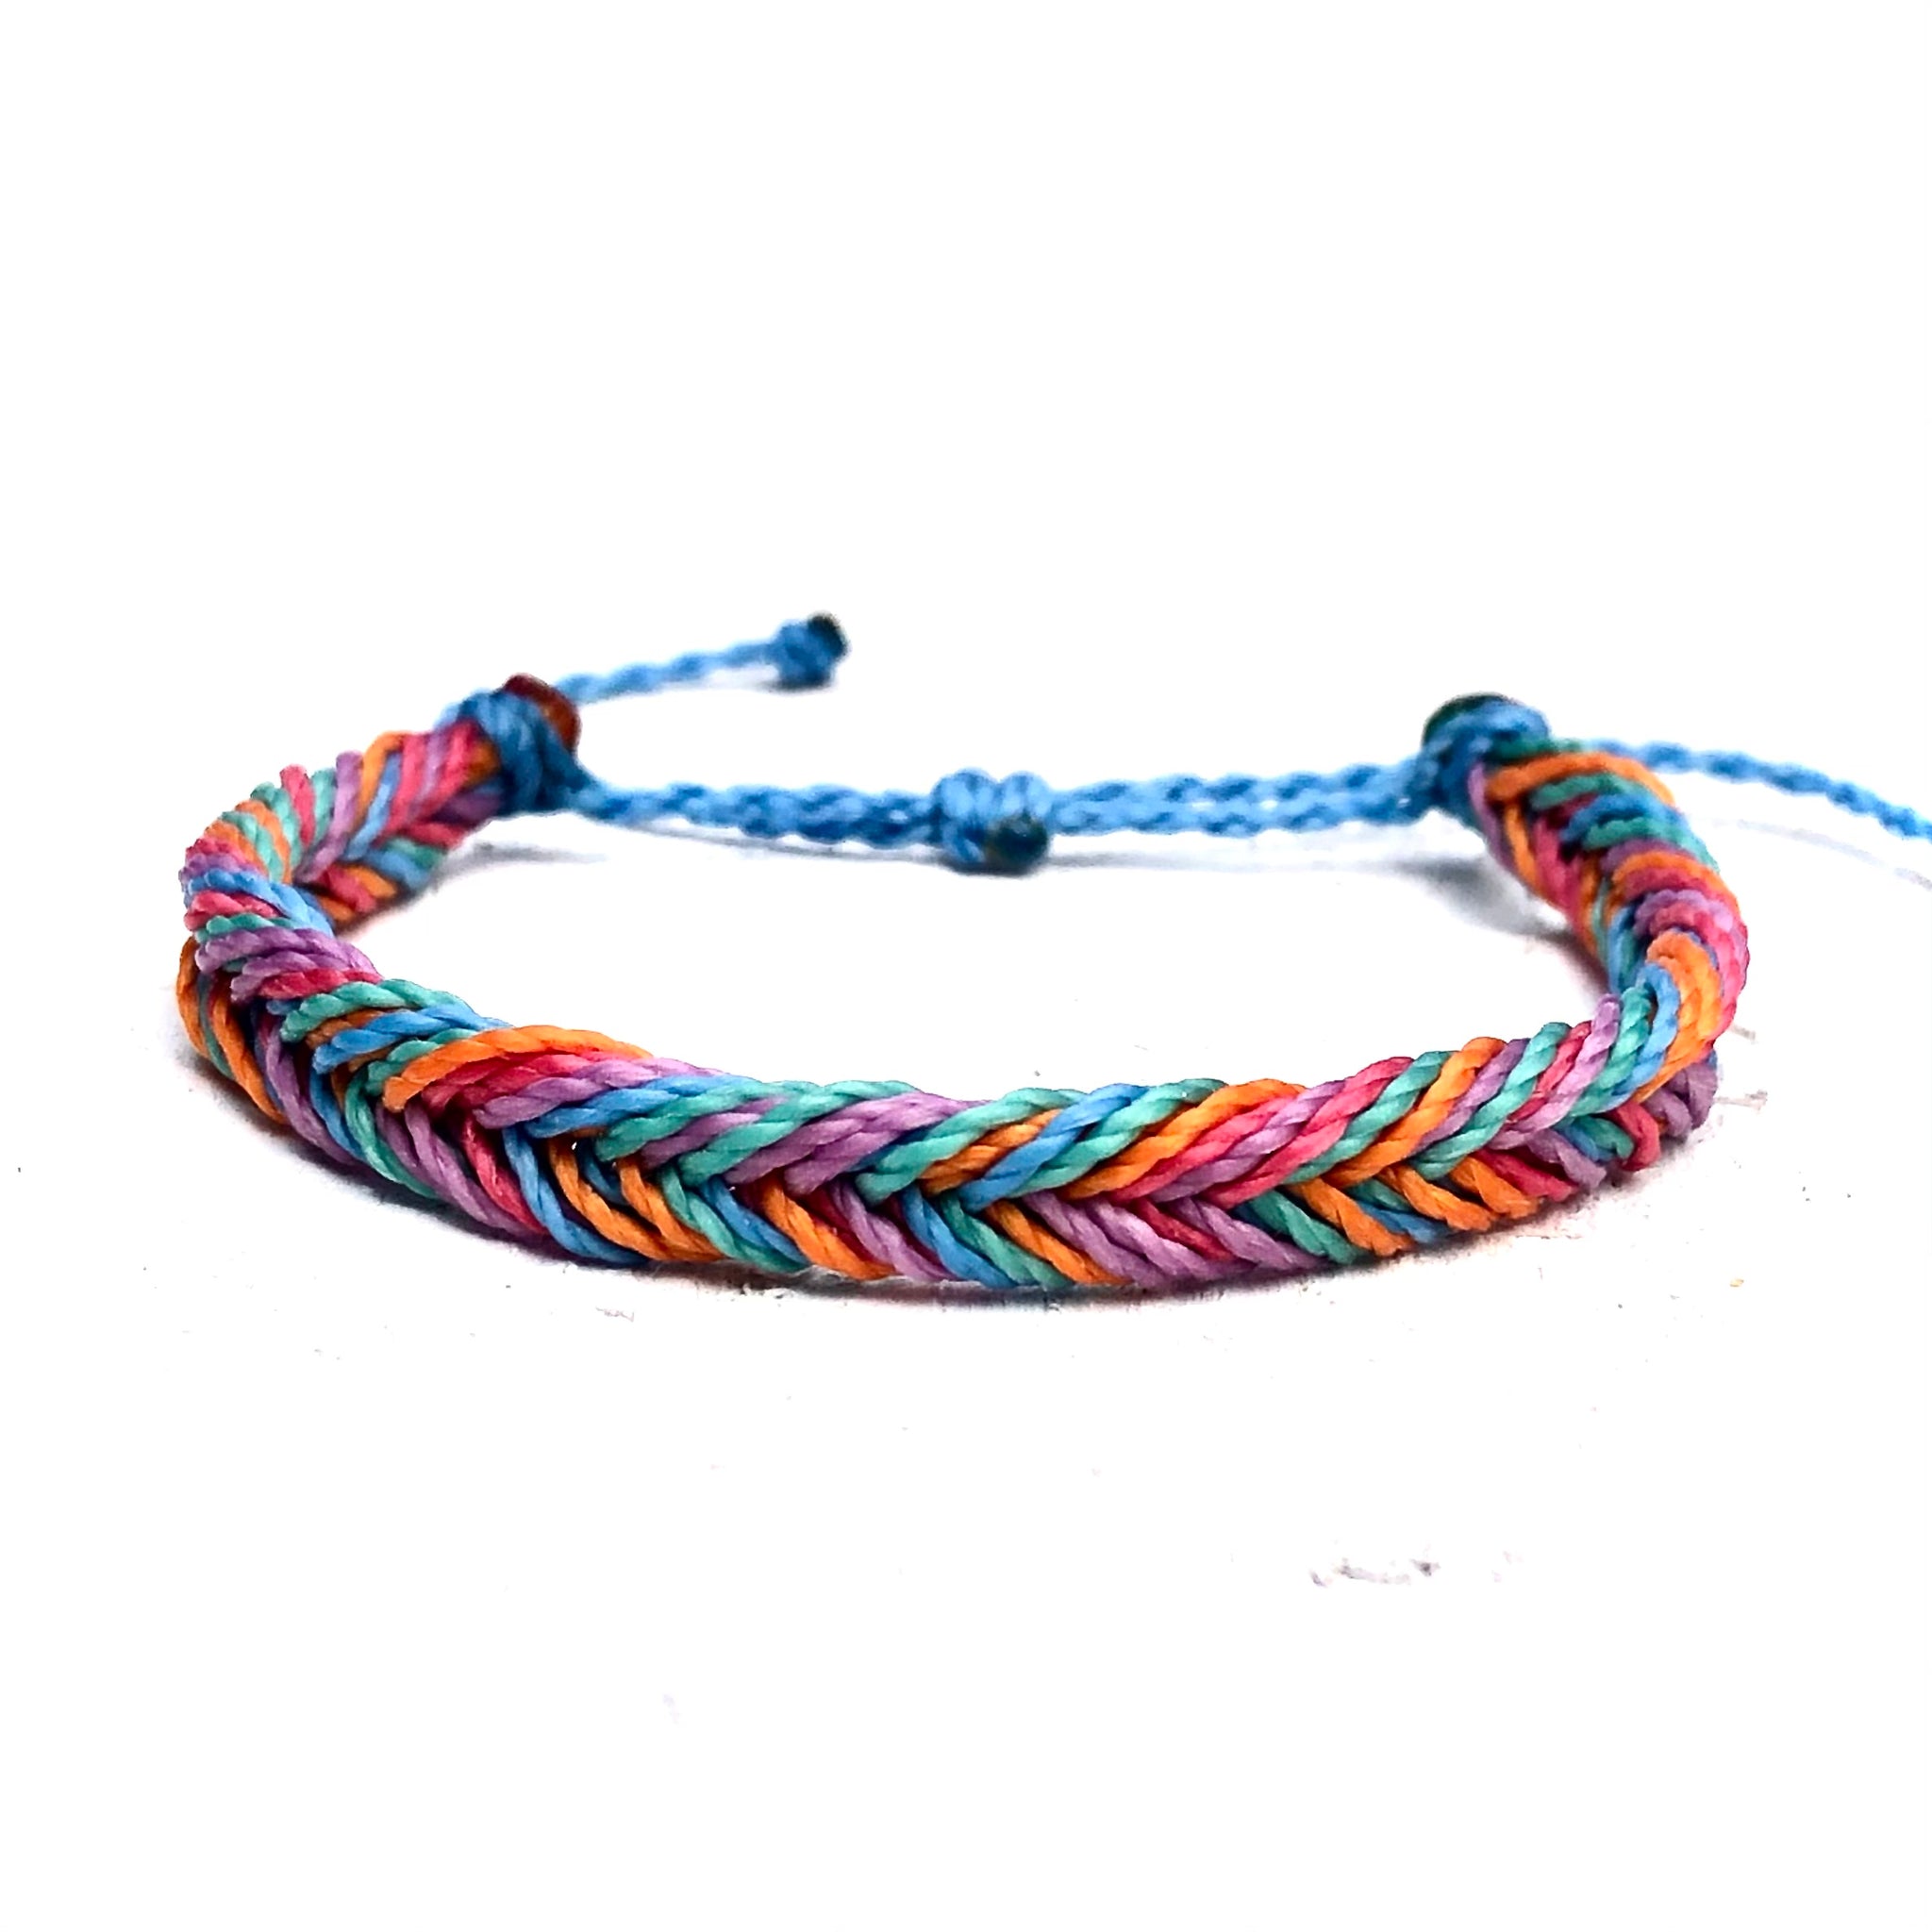 Pack of 6 Adjustable Wax String Bracelets Costa Rica Style